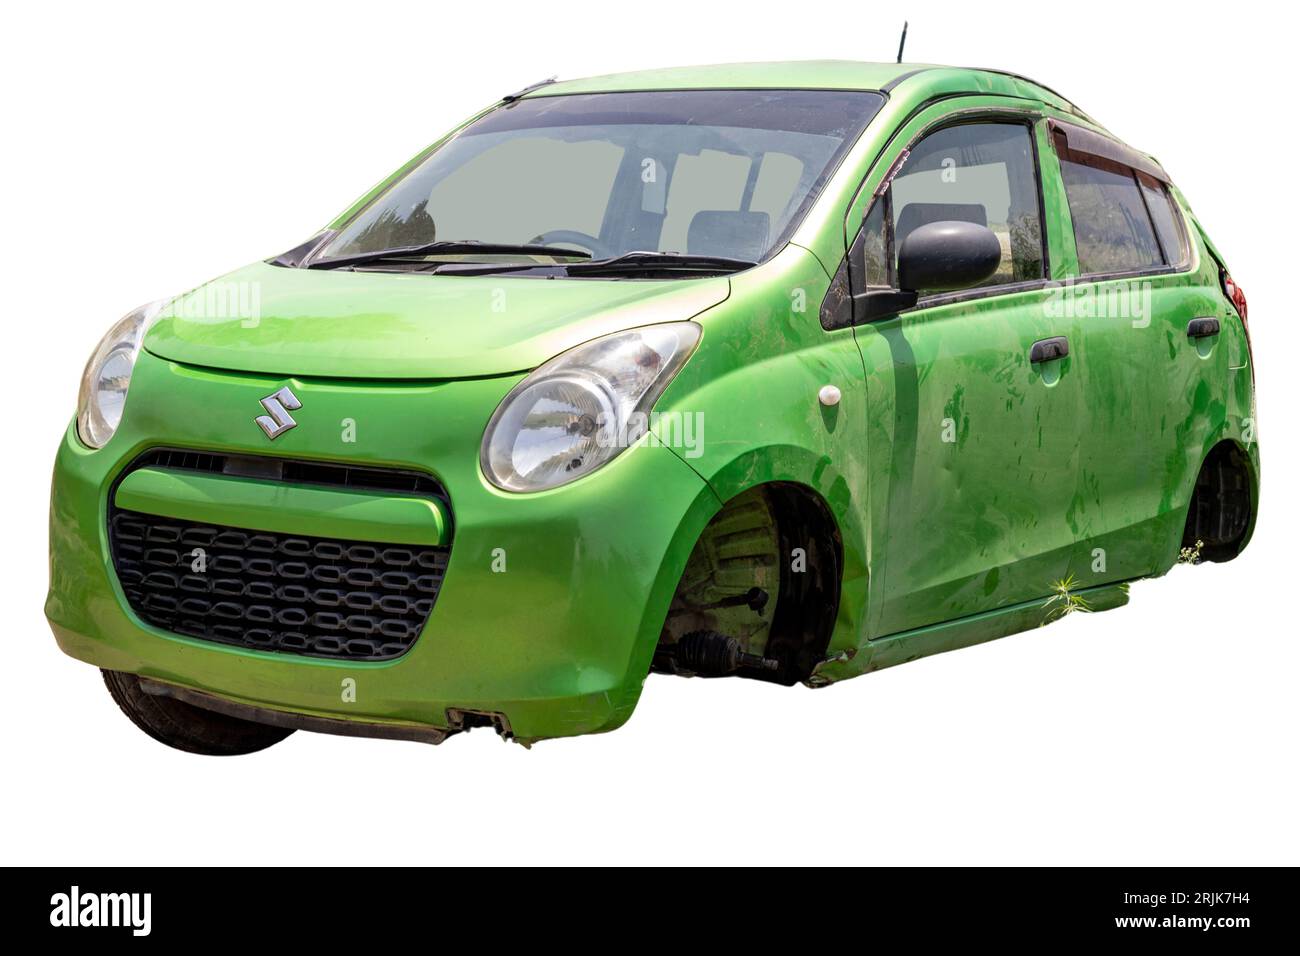 Small japanese car after road accident closeup: Swat,Pakistan - June 10, 2023. Stock Photo